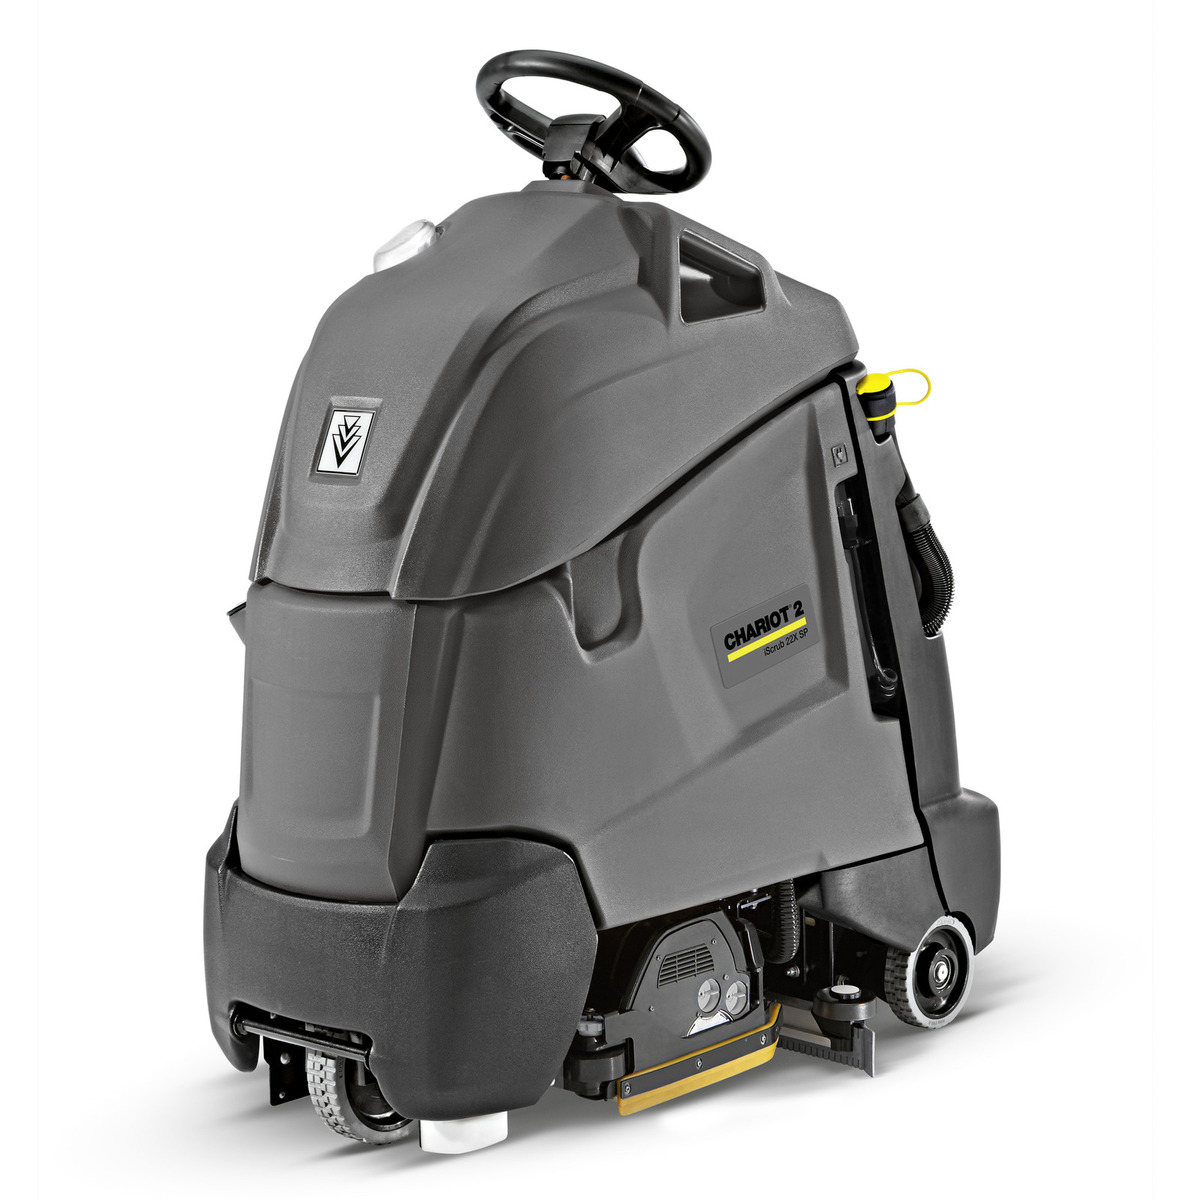 Chariot 2 iScrub 22 SP by Karcher  windsor, karcher, chariot, 2, iscrub, 22, sp, stand, on, floor, scrubber, auto-scrubber, scrub, floor, cleaning, clean, 